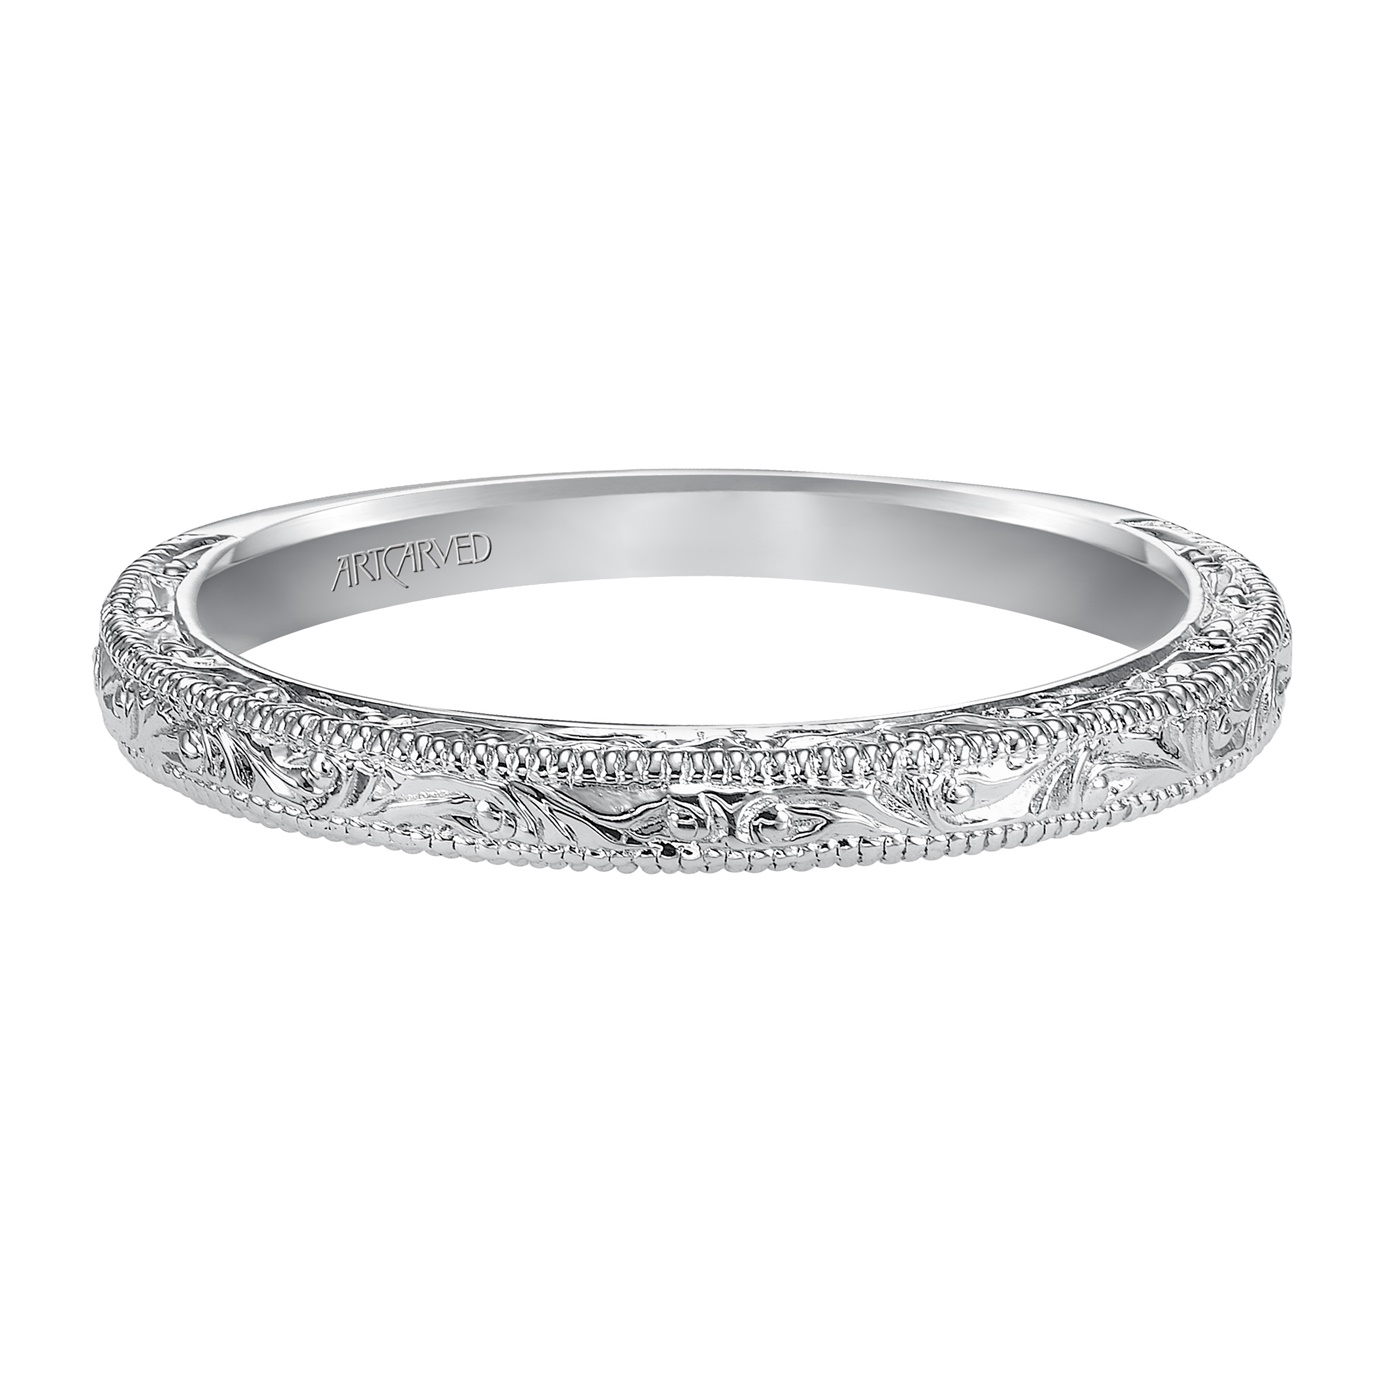 14kt White Gold Engraved Wedding Band by ArtCarved